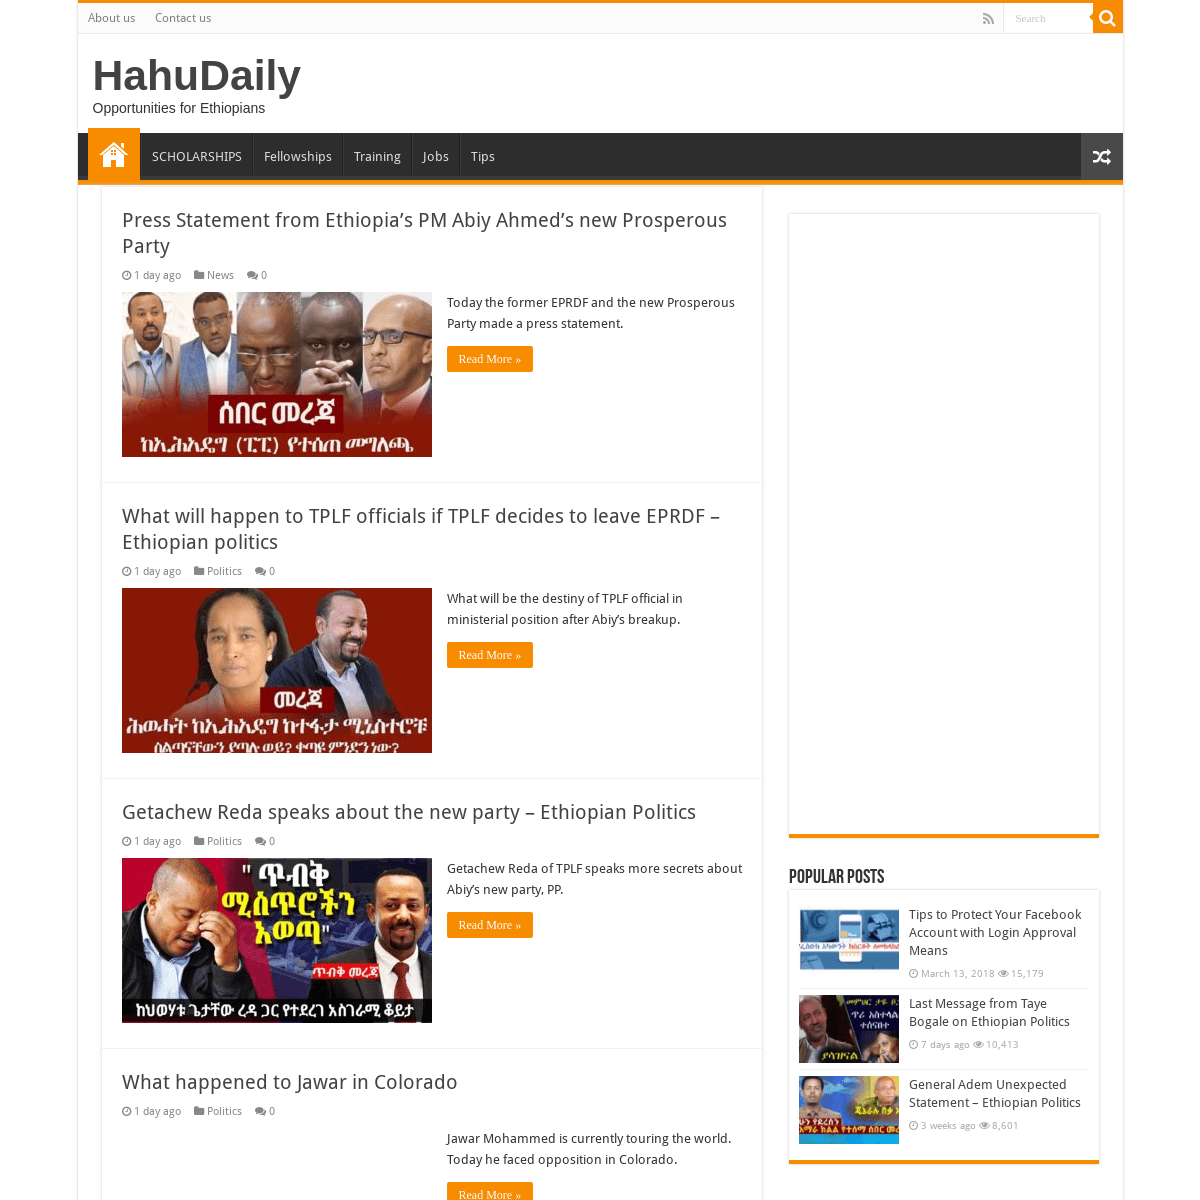 A complete backup of hahudaily.com